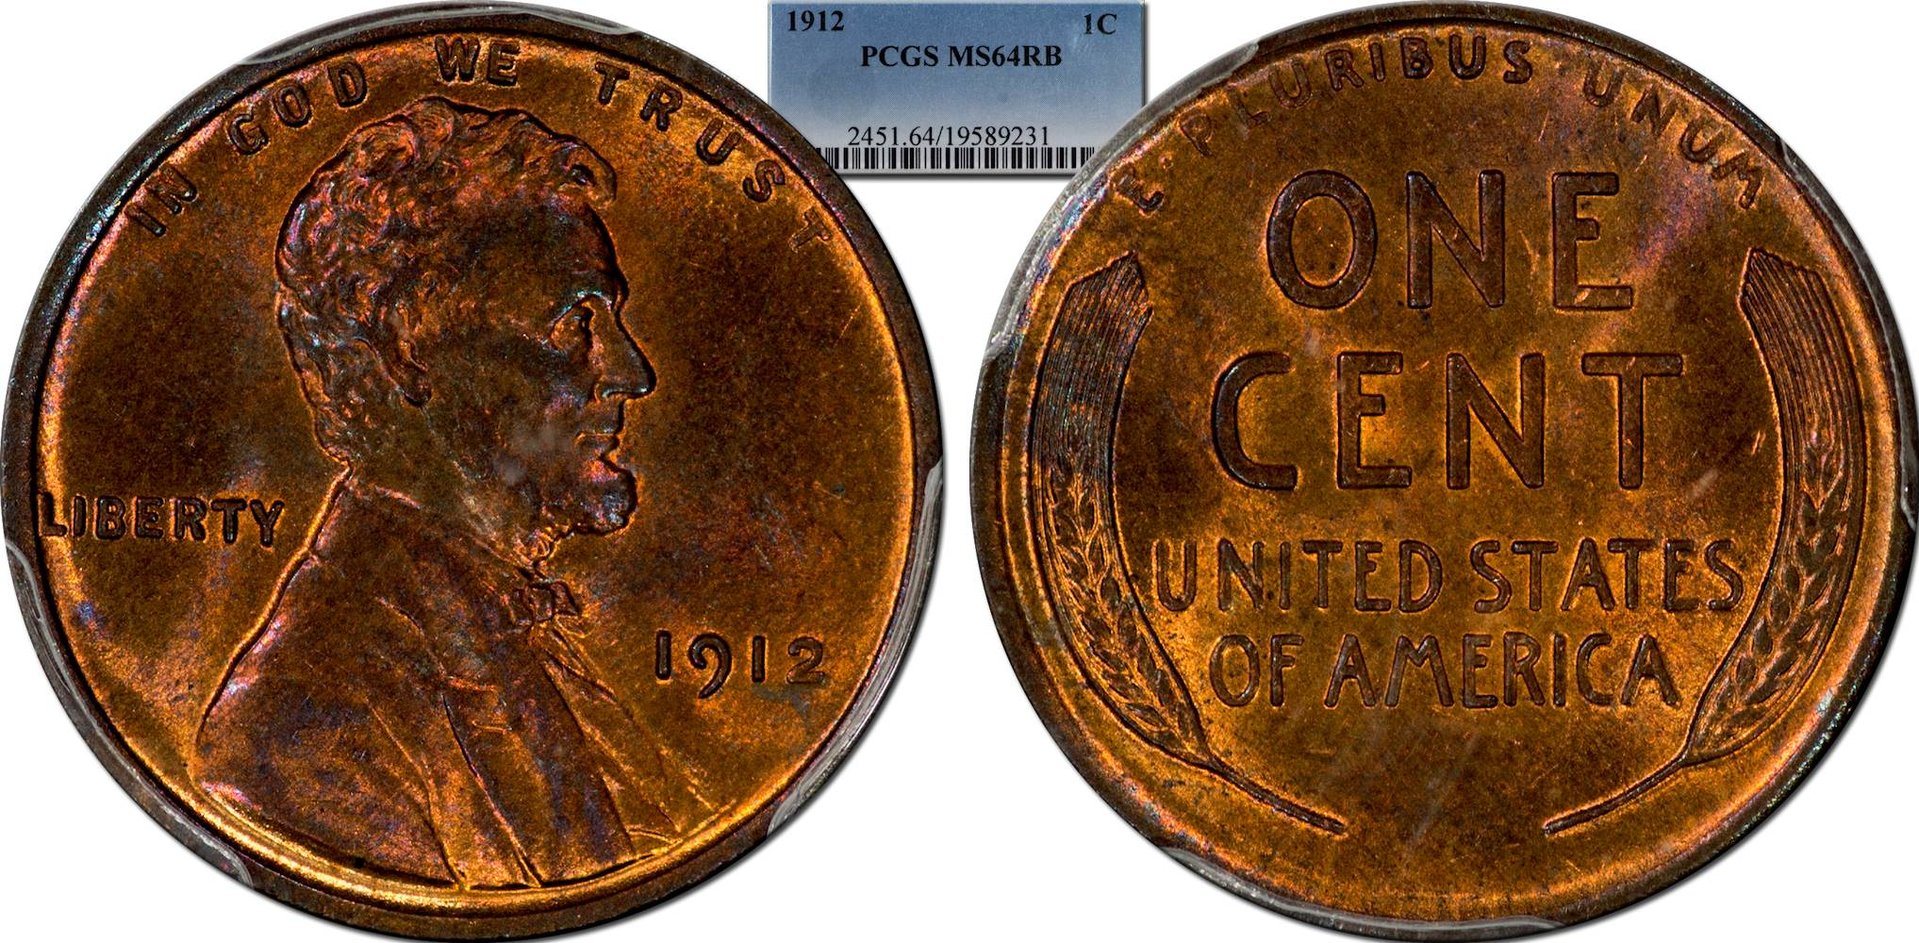 1912 Lincoln Cent PCGS MS64RB.jpg